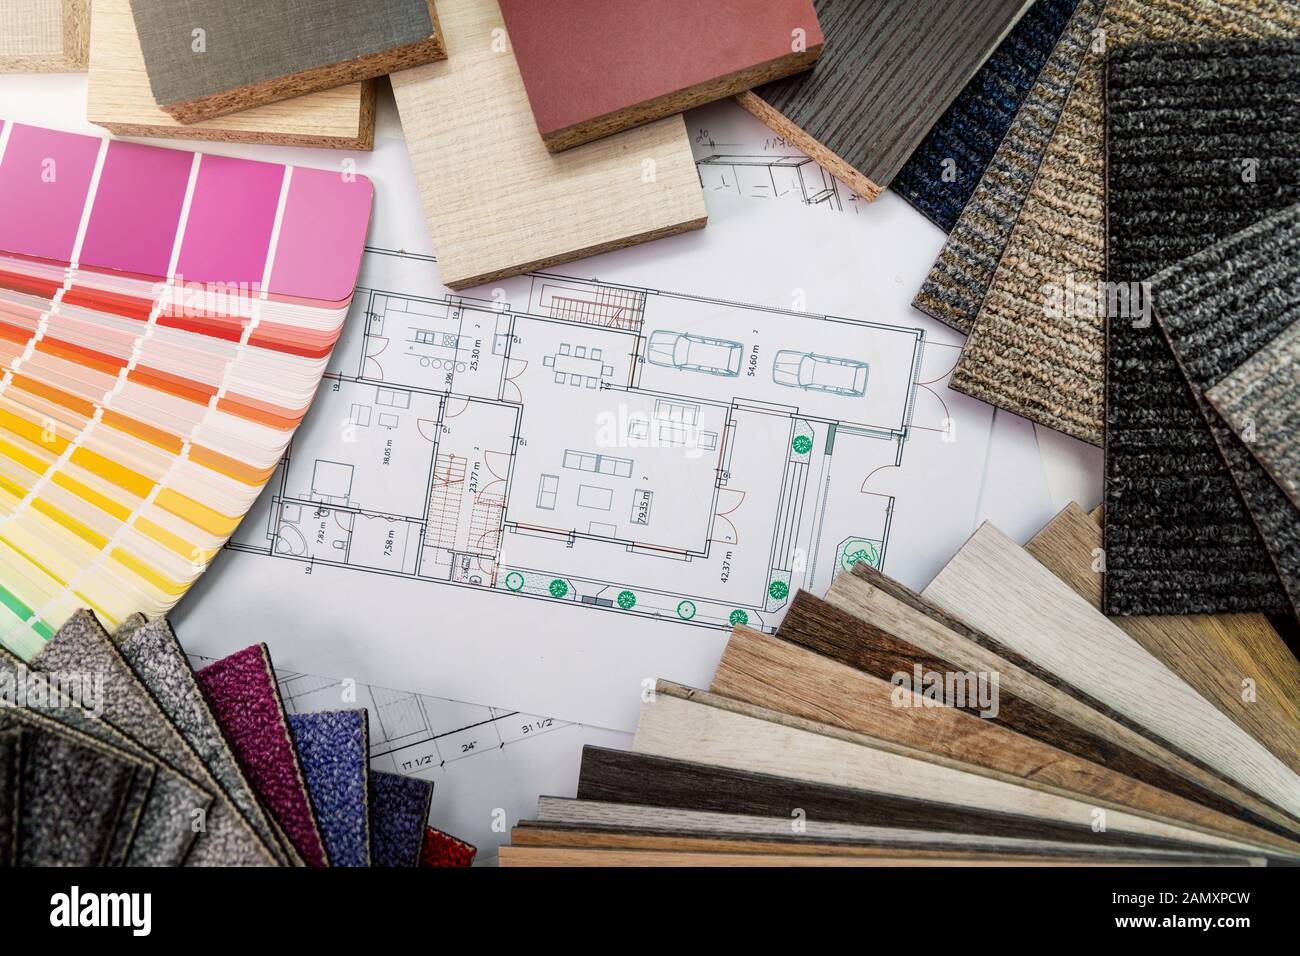 interior design materials and color samples with floor plan blueprint Stock Photo